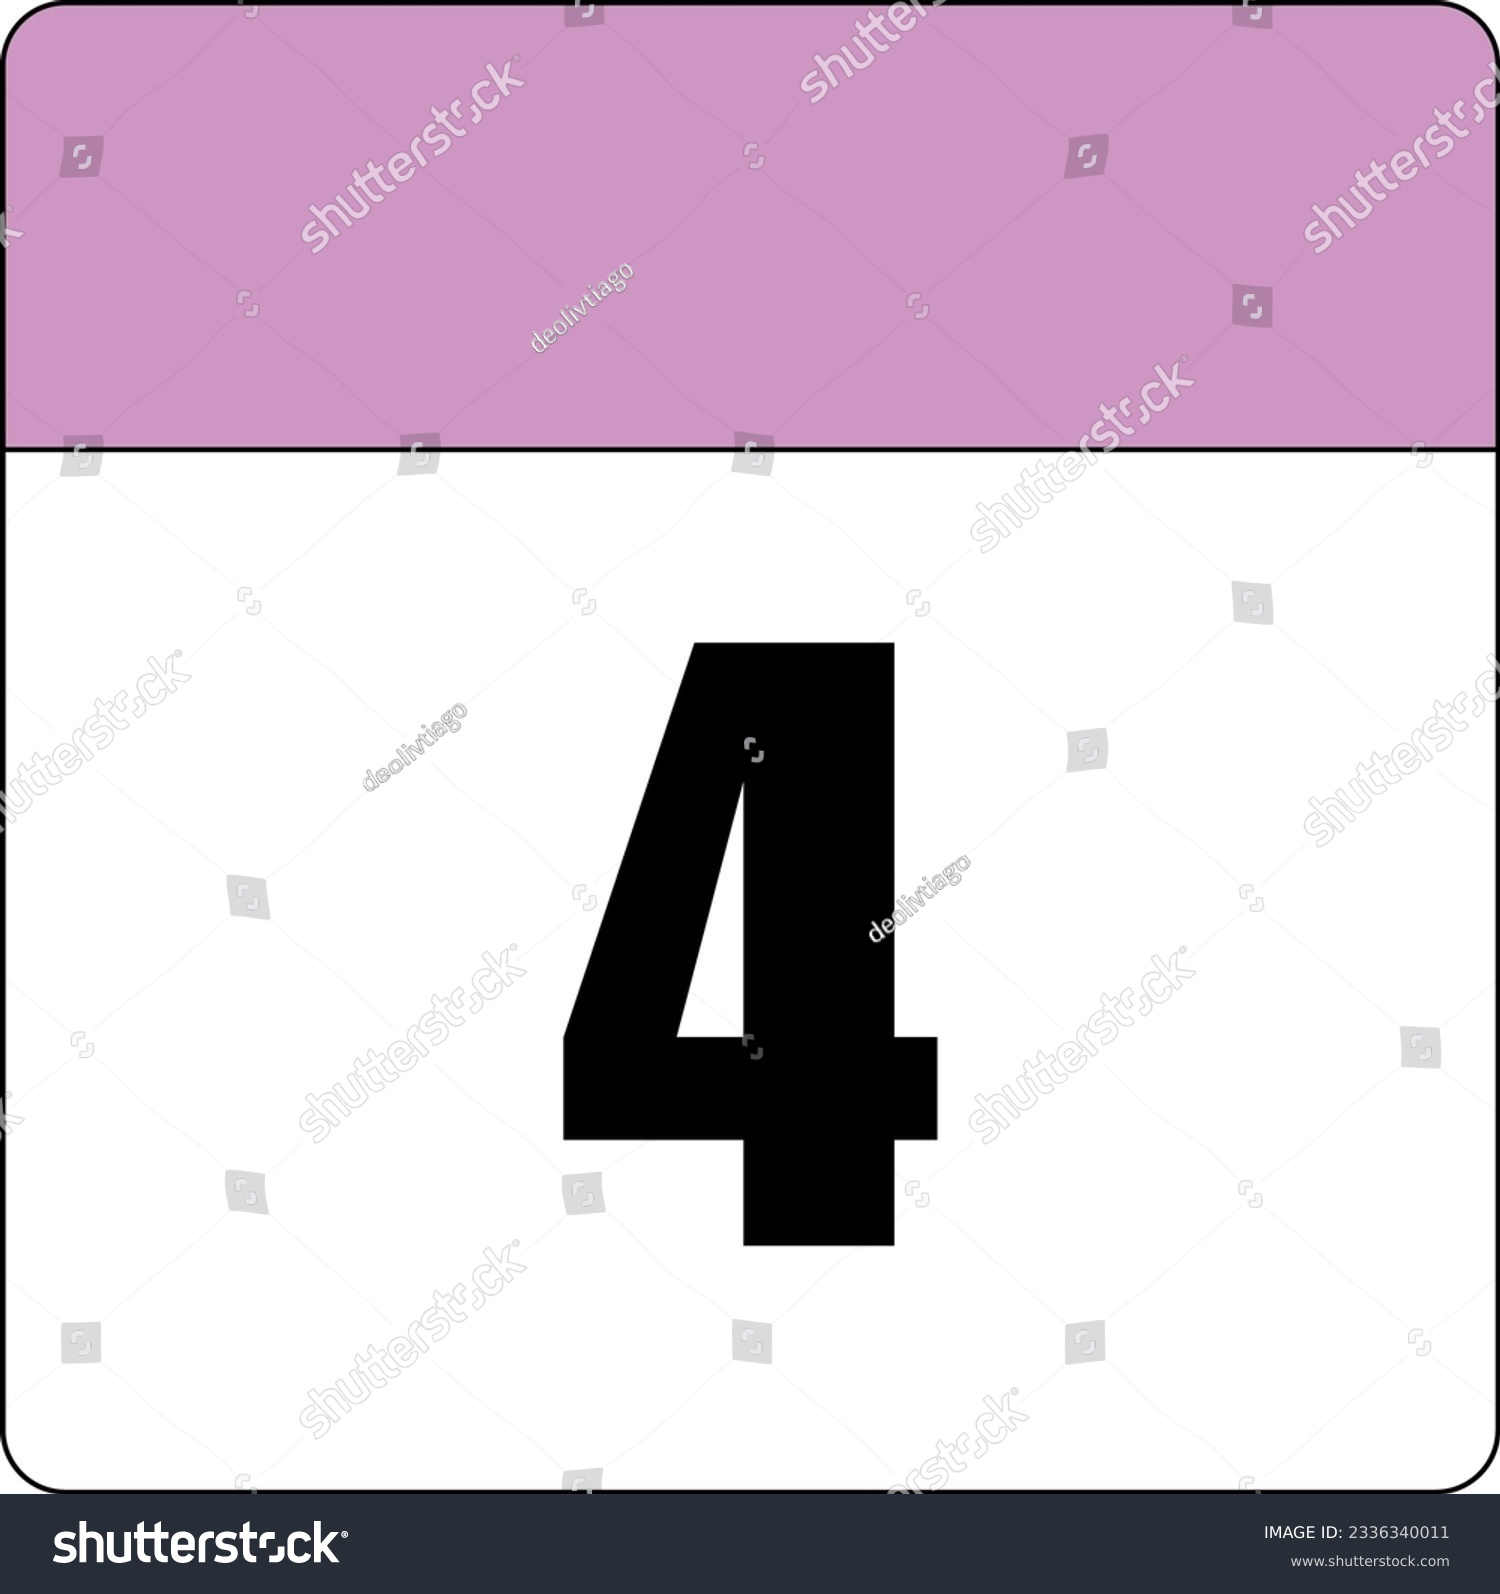 SVG of simple calendar icon with pink header and white background showing 4th day number four svg